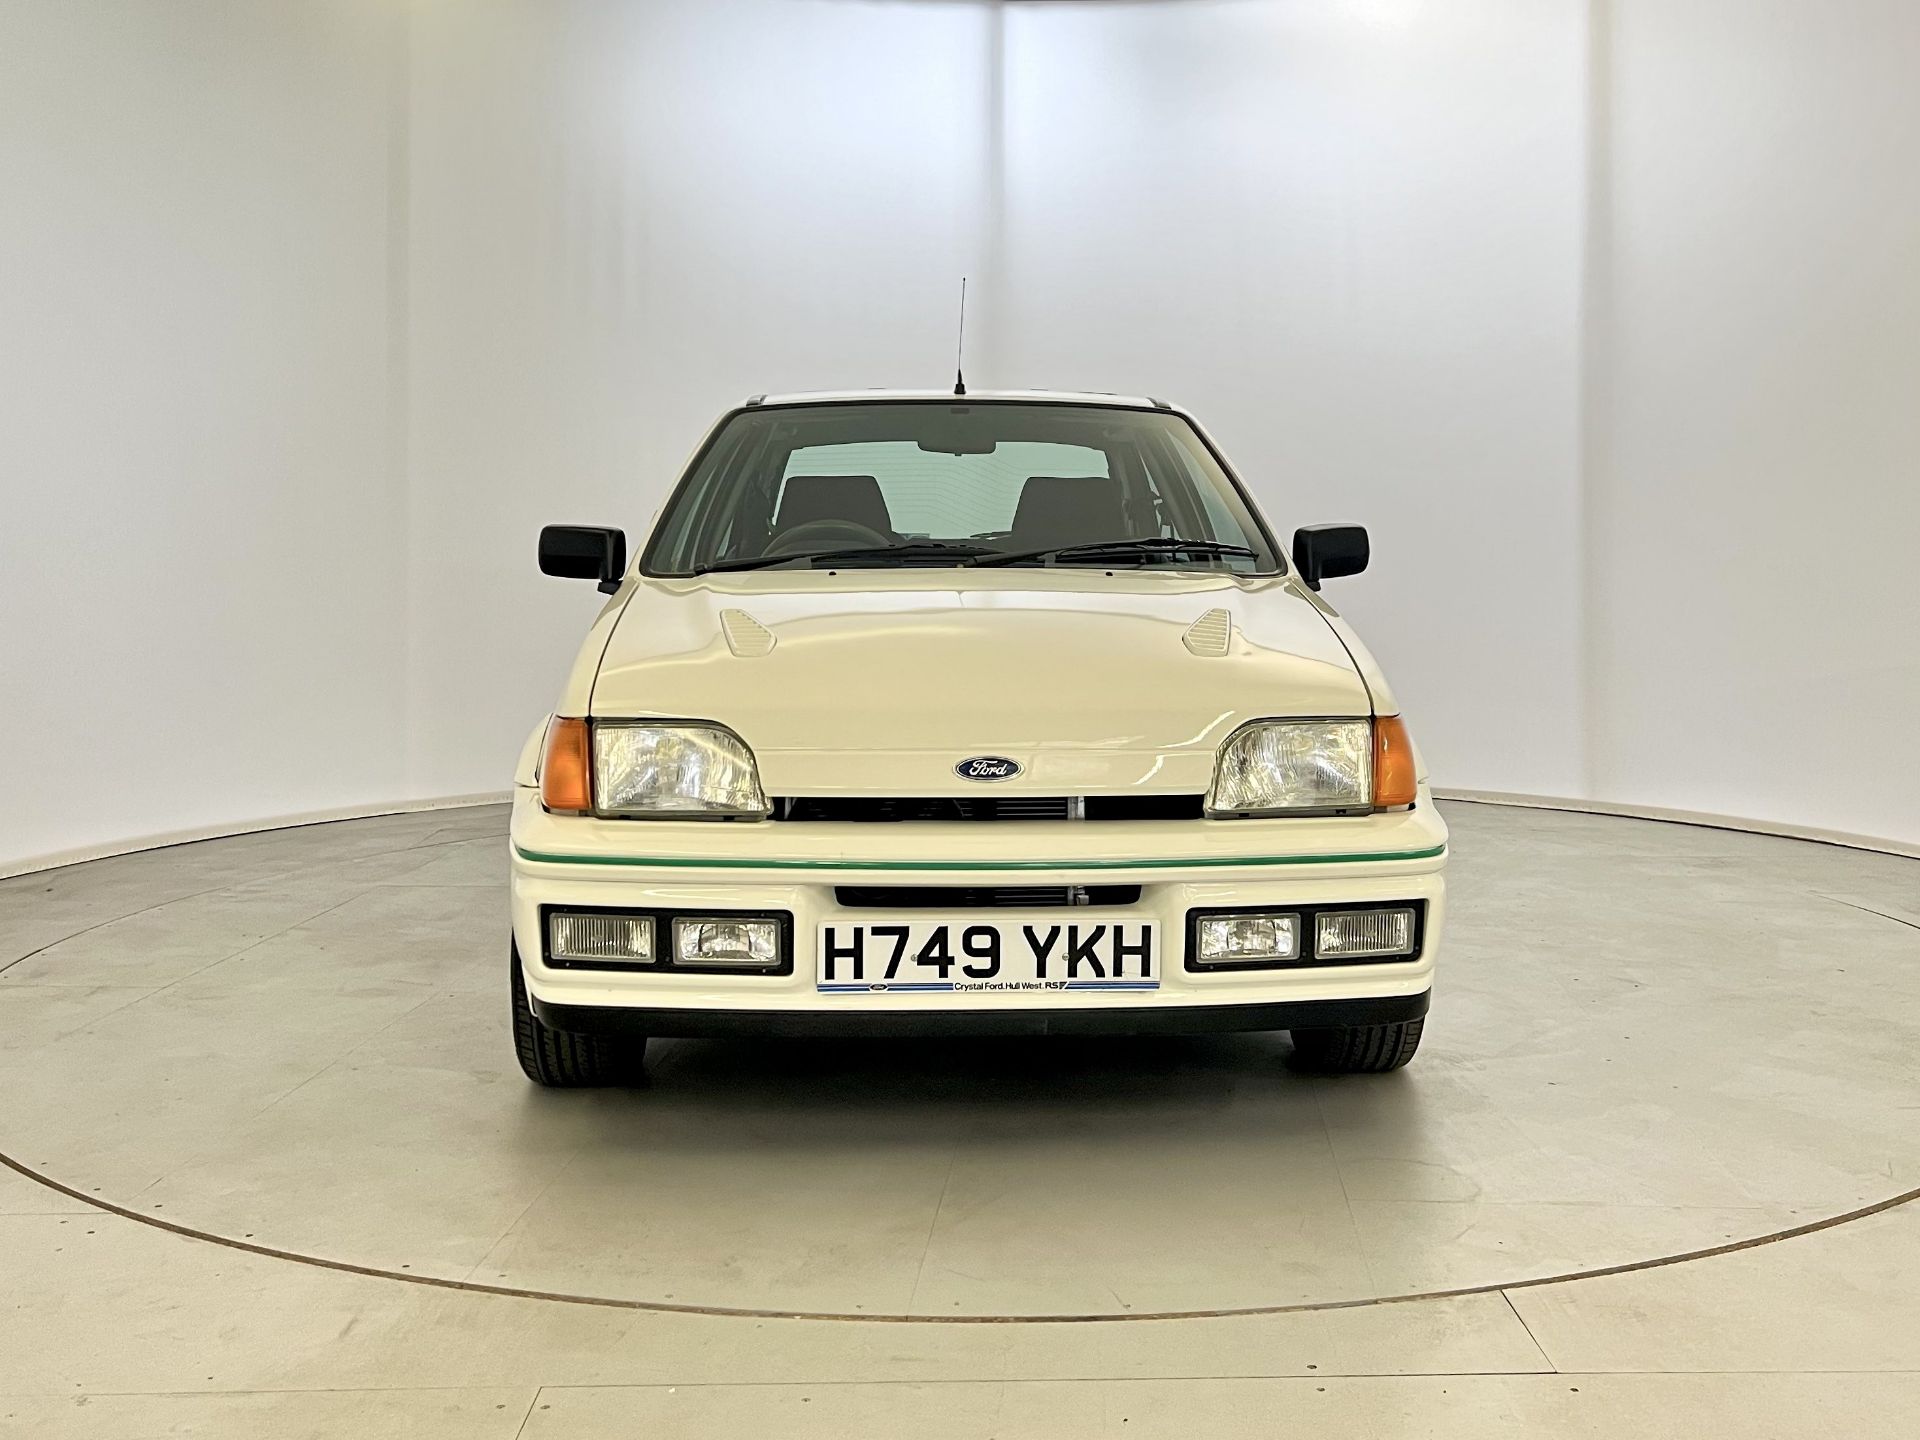 Ford Fiesta RS Turbo - Image 2 of 33